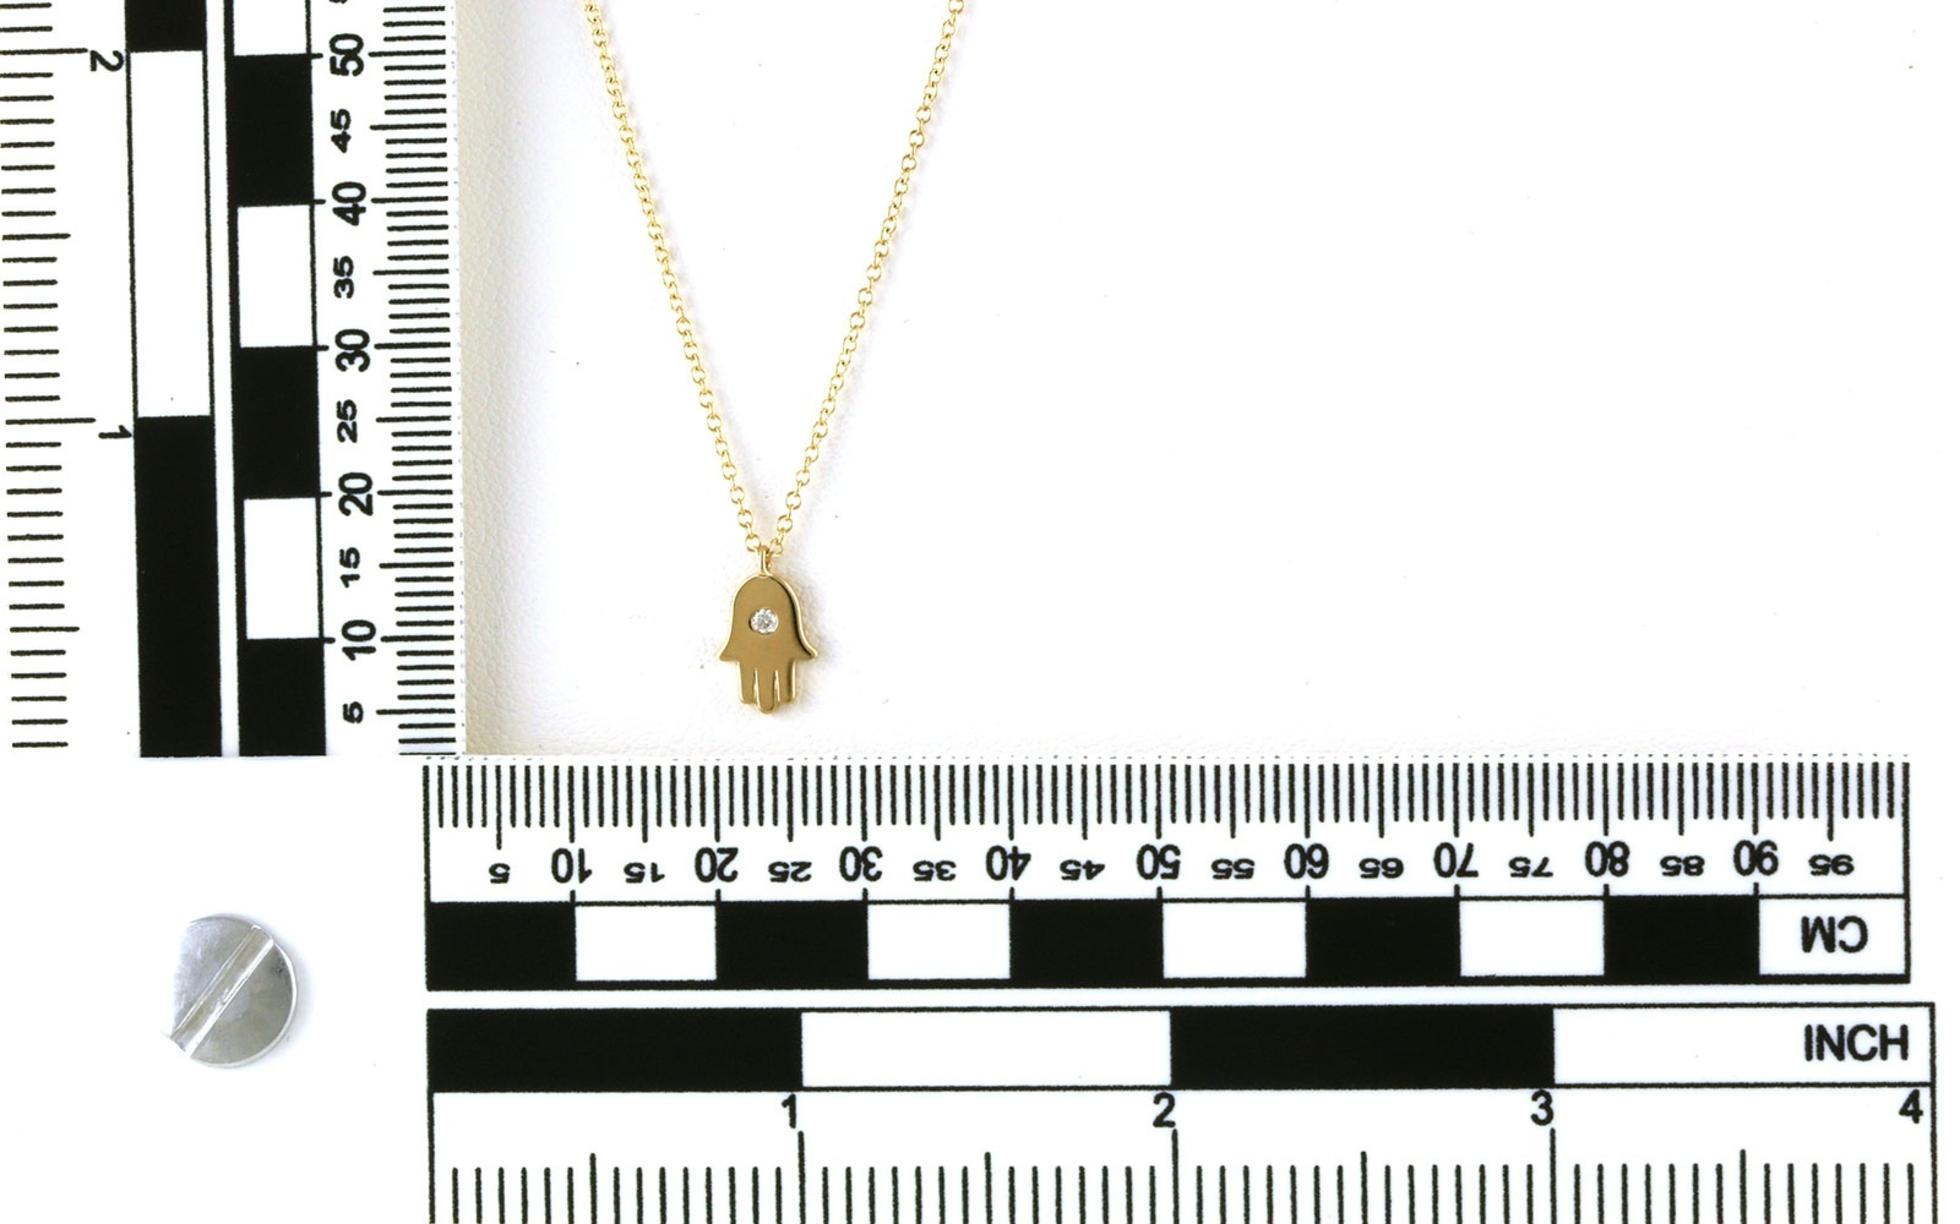 Hamas Solitaire Diamond Necklace in Yellow Gold (0.02cts TWT) scale